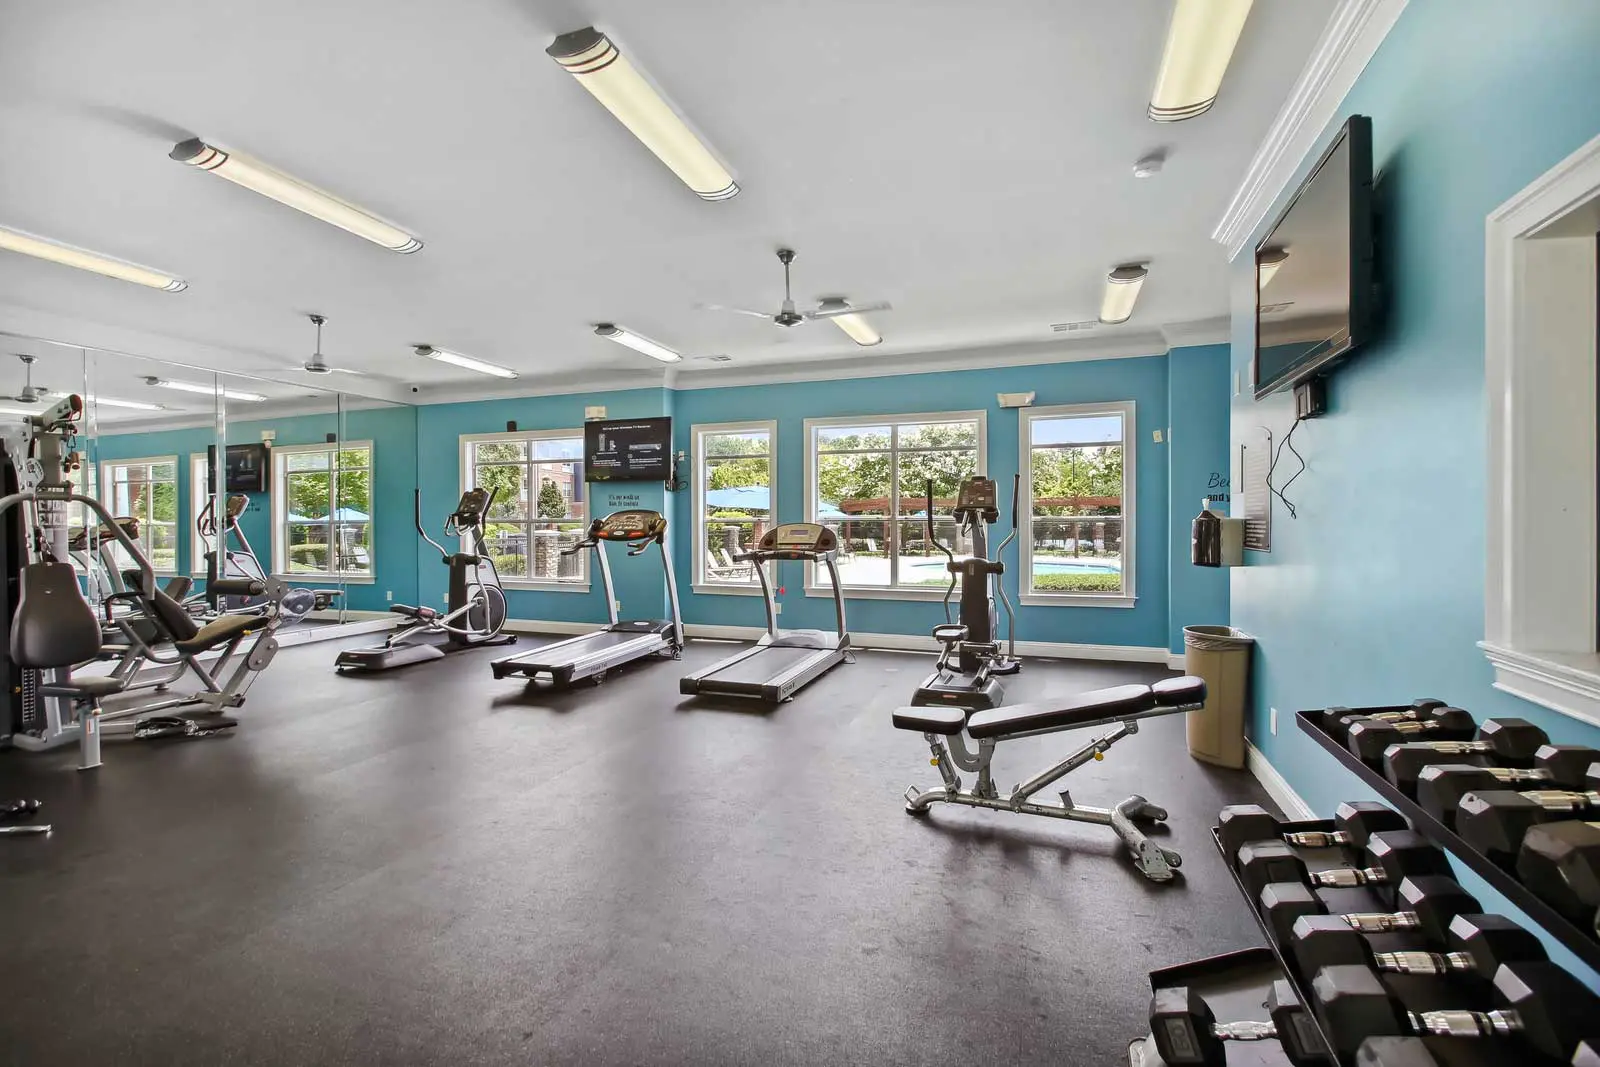 Fitness center with cardio equipment and free weights